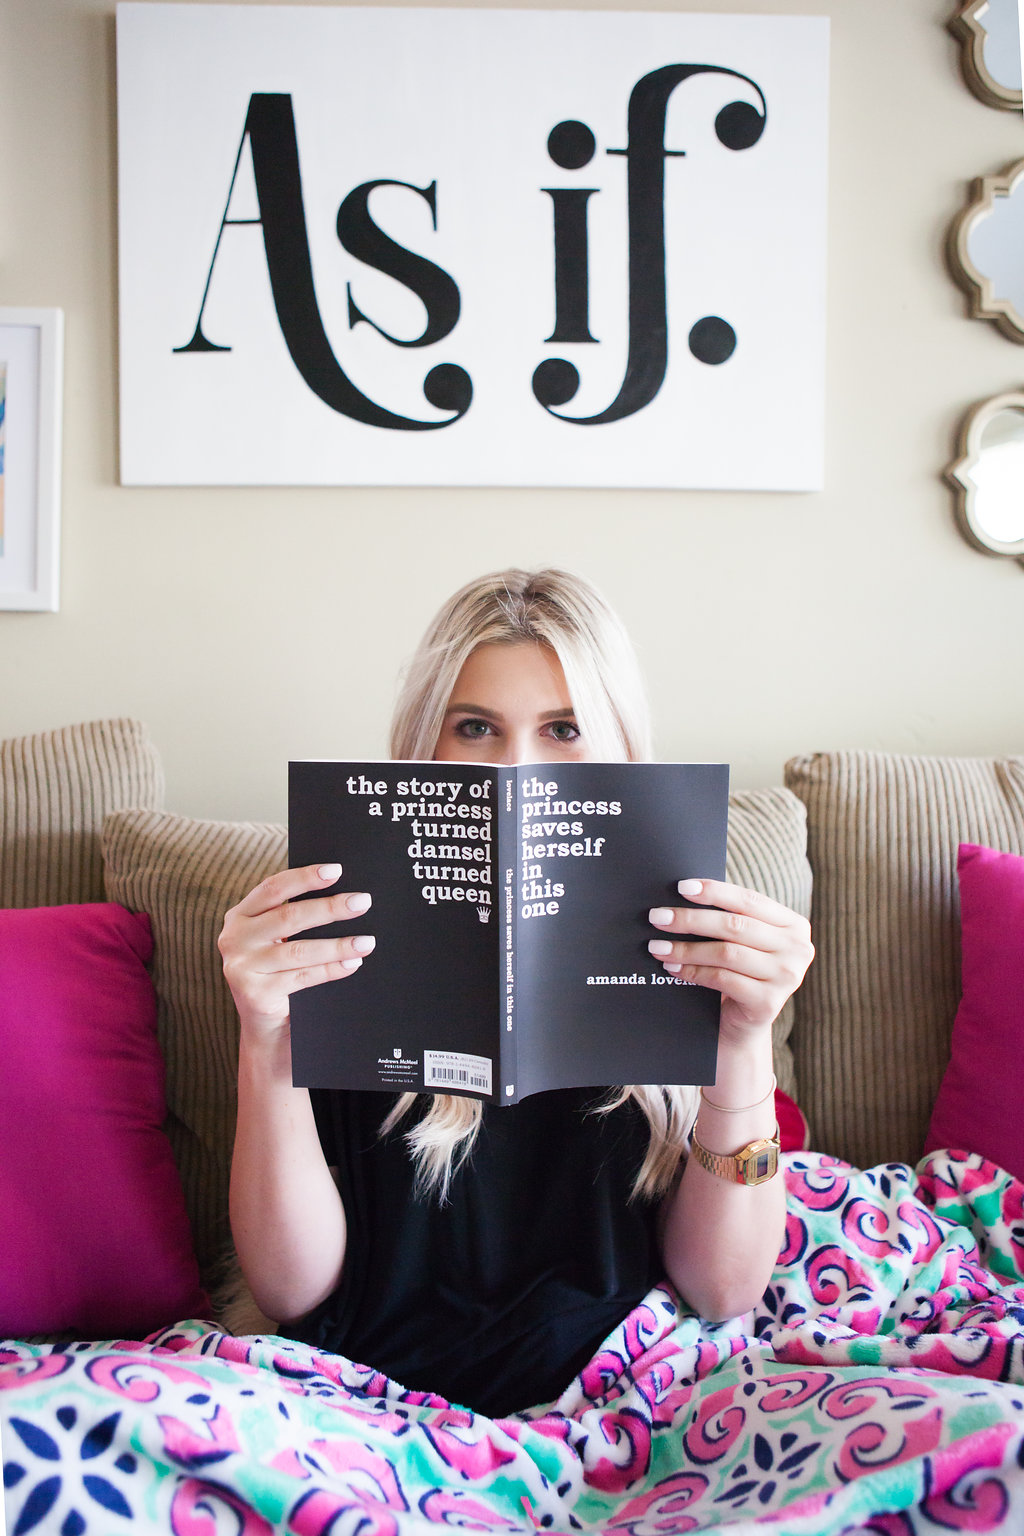 Dorm Essentials with Audrey Madison Stowe a fashion and lifestyle blogger | Texas based